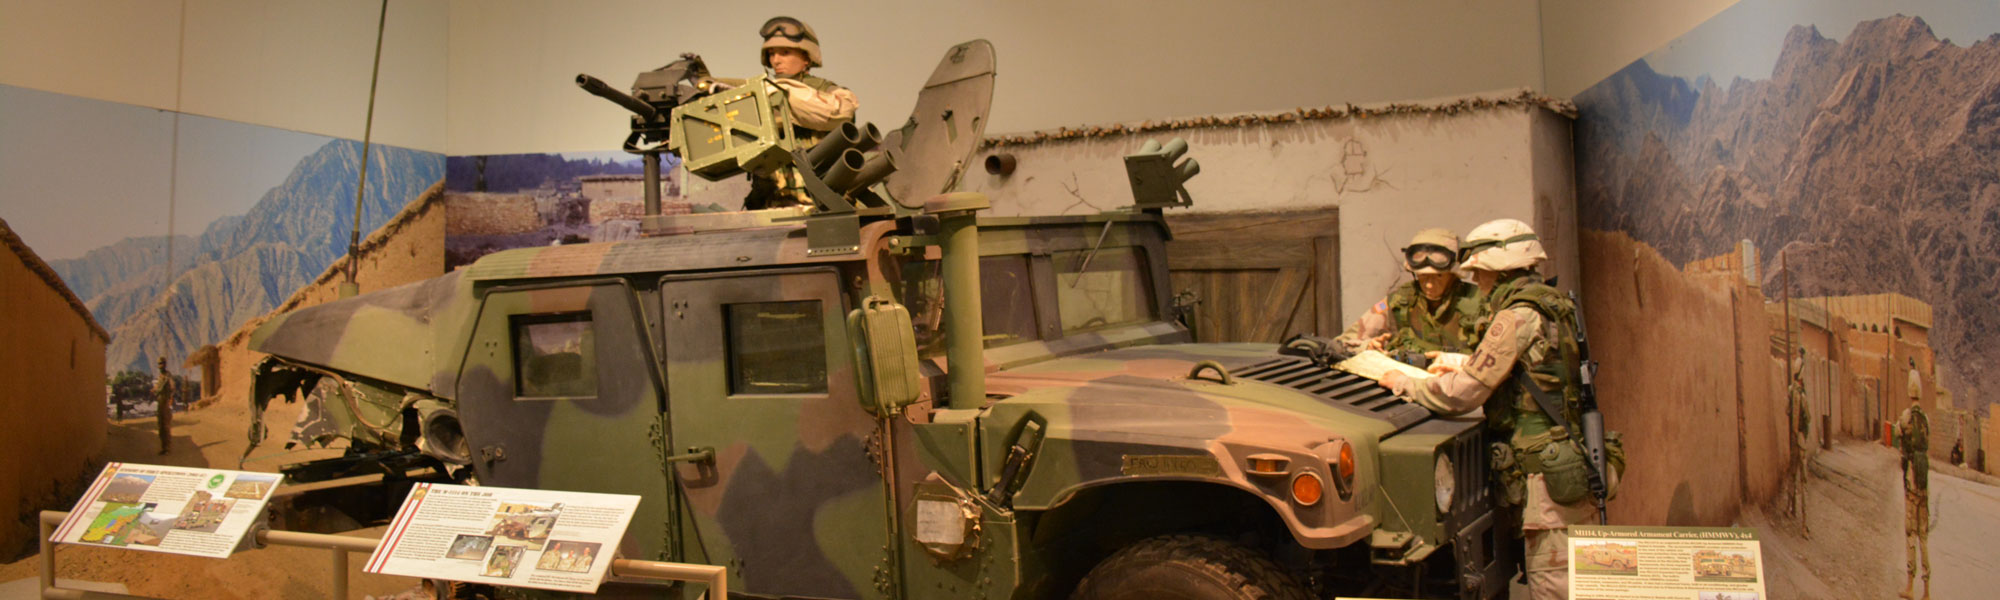 An uparmored HMMWV that was deployed in Afghanistan.